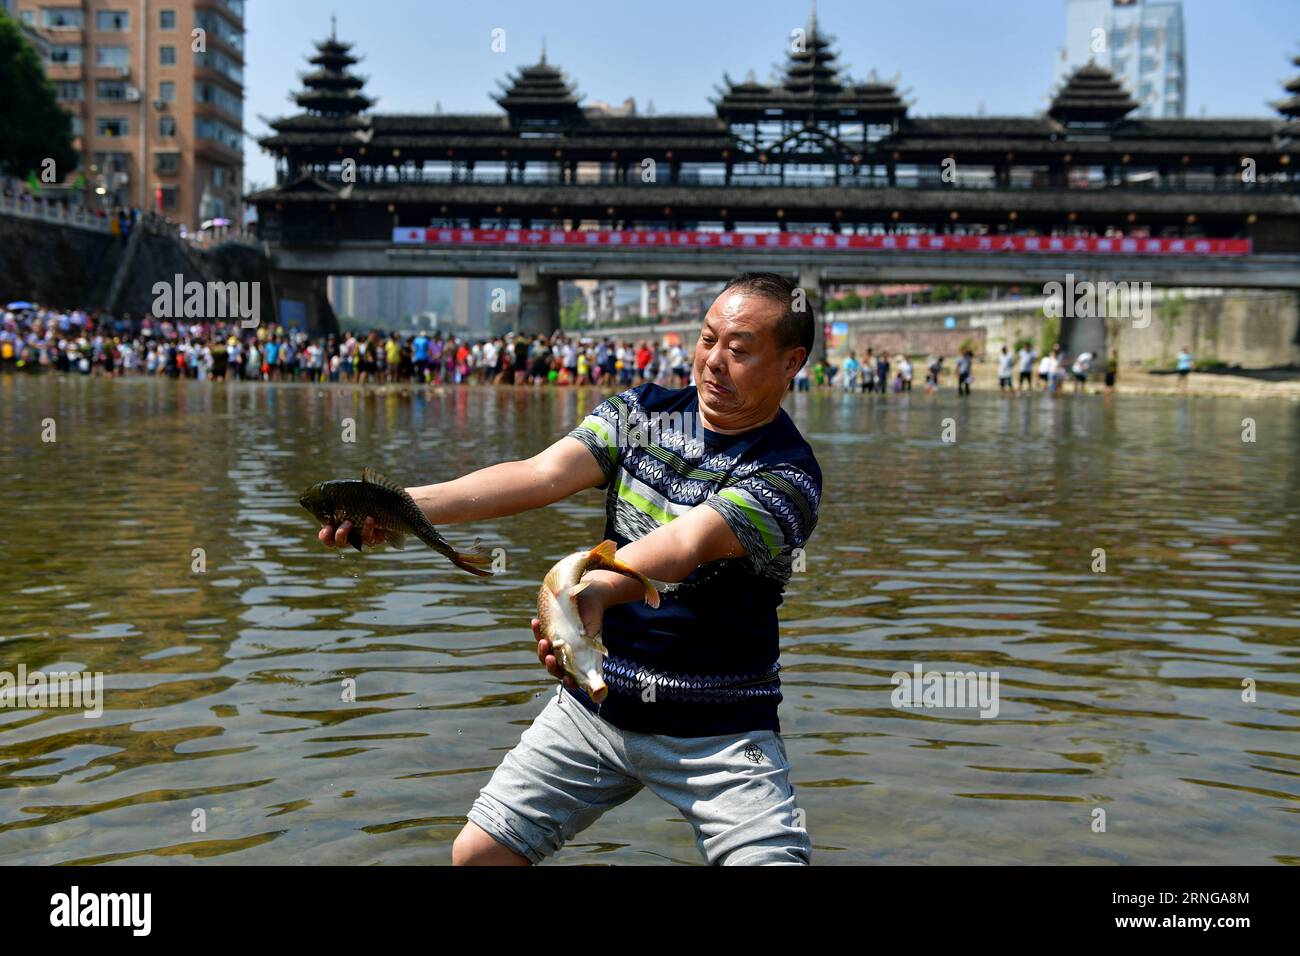 ENSHI, Sept. 16, 2016 -- A man presents two fish he catched by hands in a river in an event held to celebrate a good harvest in Xuanen County, central China s Hubei Province, Sept. 16, 2016. ) (cxy) CHINA-HUBEI-FISH CATCHING (CN) SongxWen PUBLICATIONxNOTxINxCHN   Enshi Sept 16 2016 a Man Presents Two Fish he catched by Hands in a River in to Event Hero to Celebrate a Good Harvest in Xuanen County Central China S Hubei Province Sept 16 2016 Cxy China Hubei Fish Catching CN SongxWen PUBLICATIONxNOTxINxCHN Stock Photo